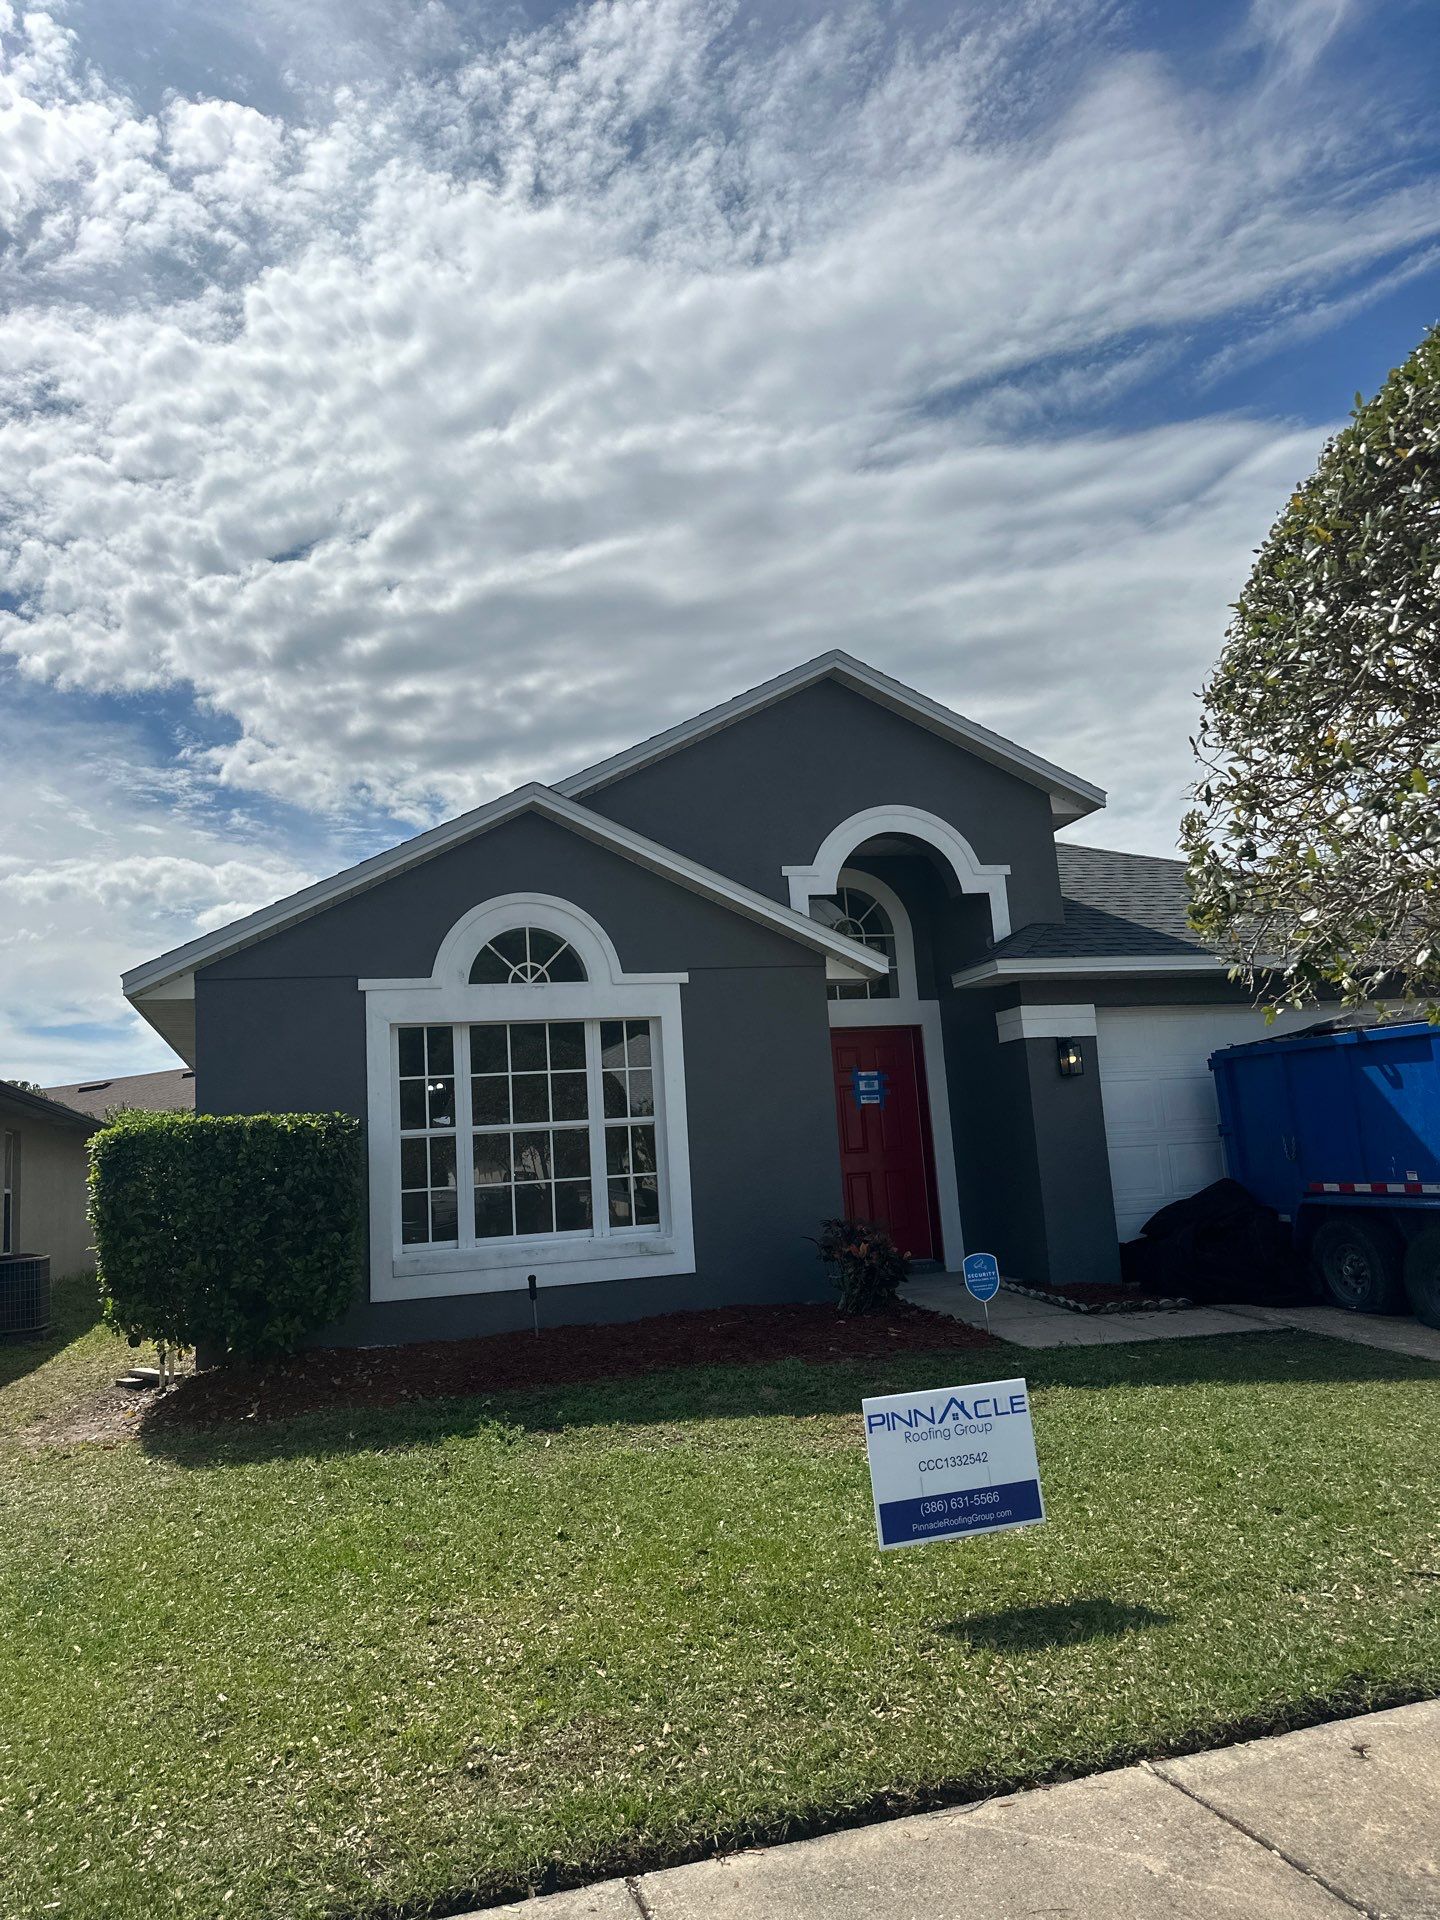 Asphalt shingle roof replace by our roofers, sanford FL 